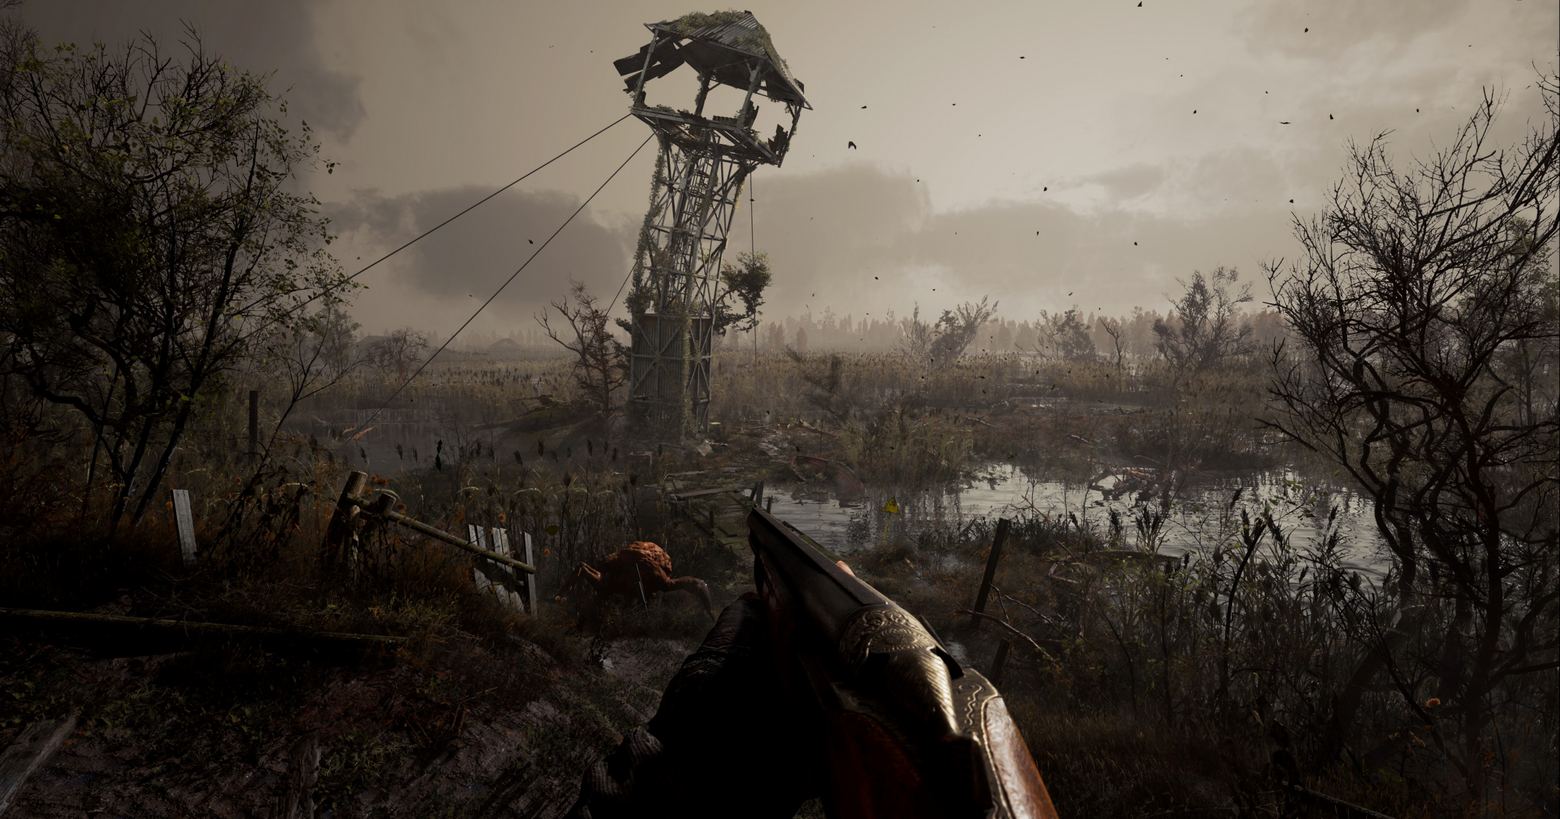 In Stalker 2 you can run through a huge post-apocalyptic open world. We also get to see this in a gameplay trailer. Here is a screenshot of it. In this one, we look from the player's point of view in first person view at a vast, gray, gloomy swampland that consists of many ponds and stagnant bushes. The player is holding a shotgun, which we see at the bottom center of the image. Right in front of him, a mutated creature is walking around on the swamp floor. It has a reddish skin color and resembles a large arachnid with several legs. To the right and left of the image are black dead trees in a crop. In the background, a tower scaffold rises from the swamp, bent to the right by the destruction and looking very damaged. The sky is light gray and overcast and we see many flying particles in the air.